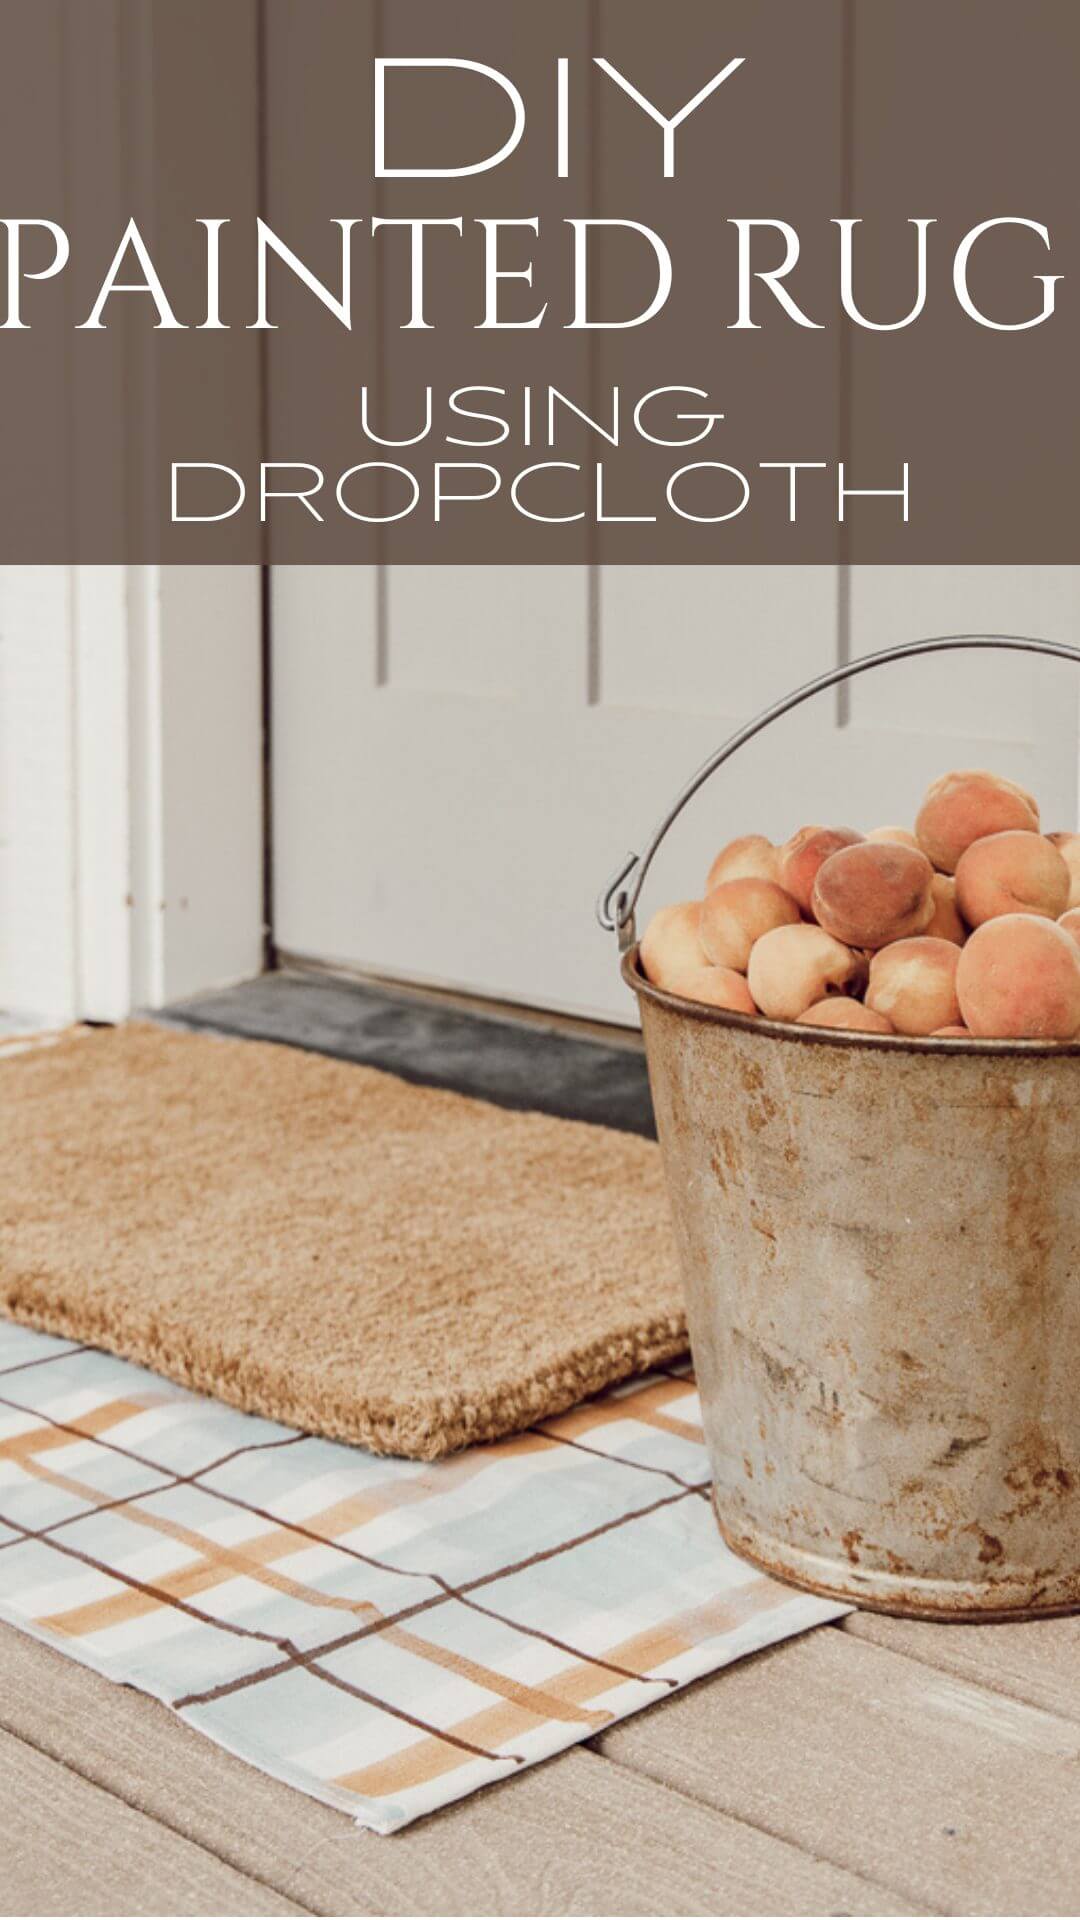 How to make a painted rug using drop cloth canvas. Not just any canvas but a rubber backed drop cloth!